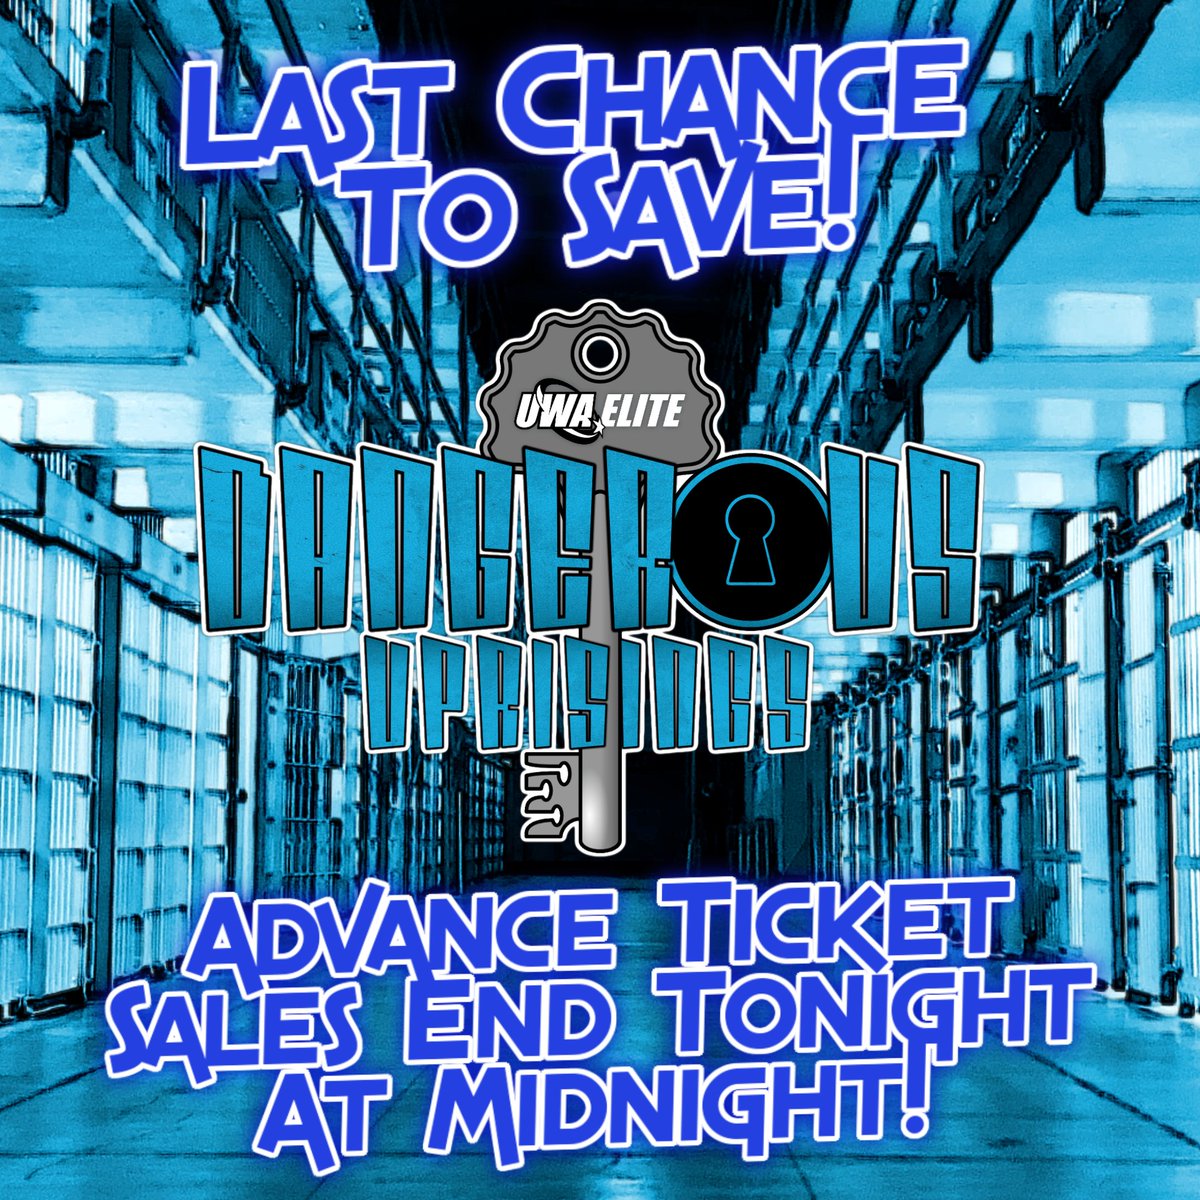 Advance ticket sales for #DangerousUprisings end TONIGHT at Midnight! Head over to UWAElite.com to get your tickets and save! 'UWA Elite Dangerous Uprisings' takes place tomorrow night, May 11th, at 6:30pm from the South River VFW (31 Reid Street, South River, NJ